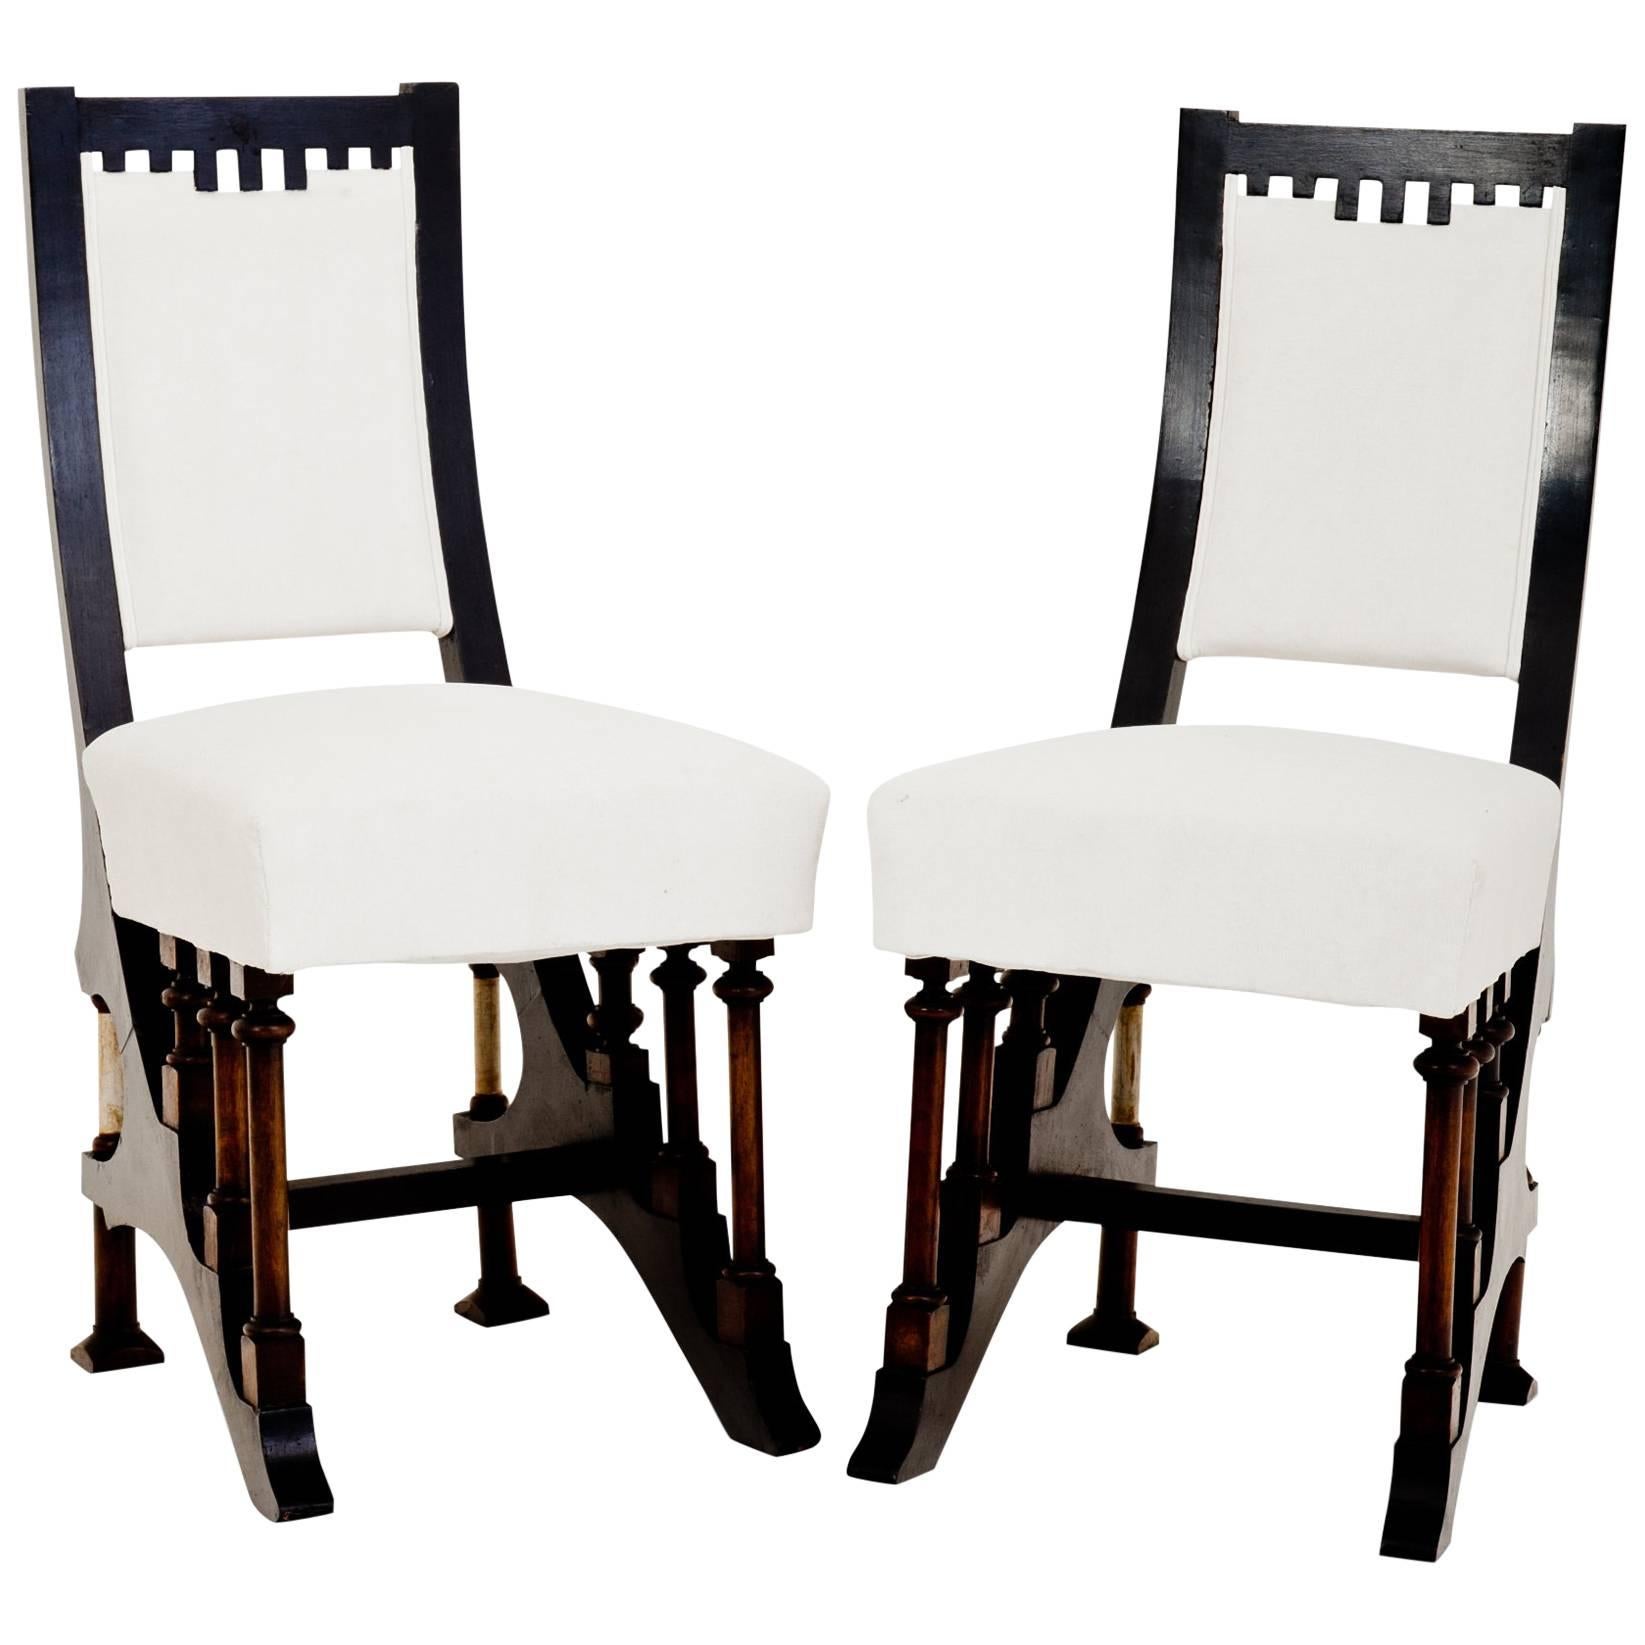 Art Nouveau Chairs in Carlo Bugatti Style, Italy, First Half of the 20th Century